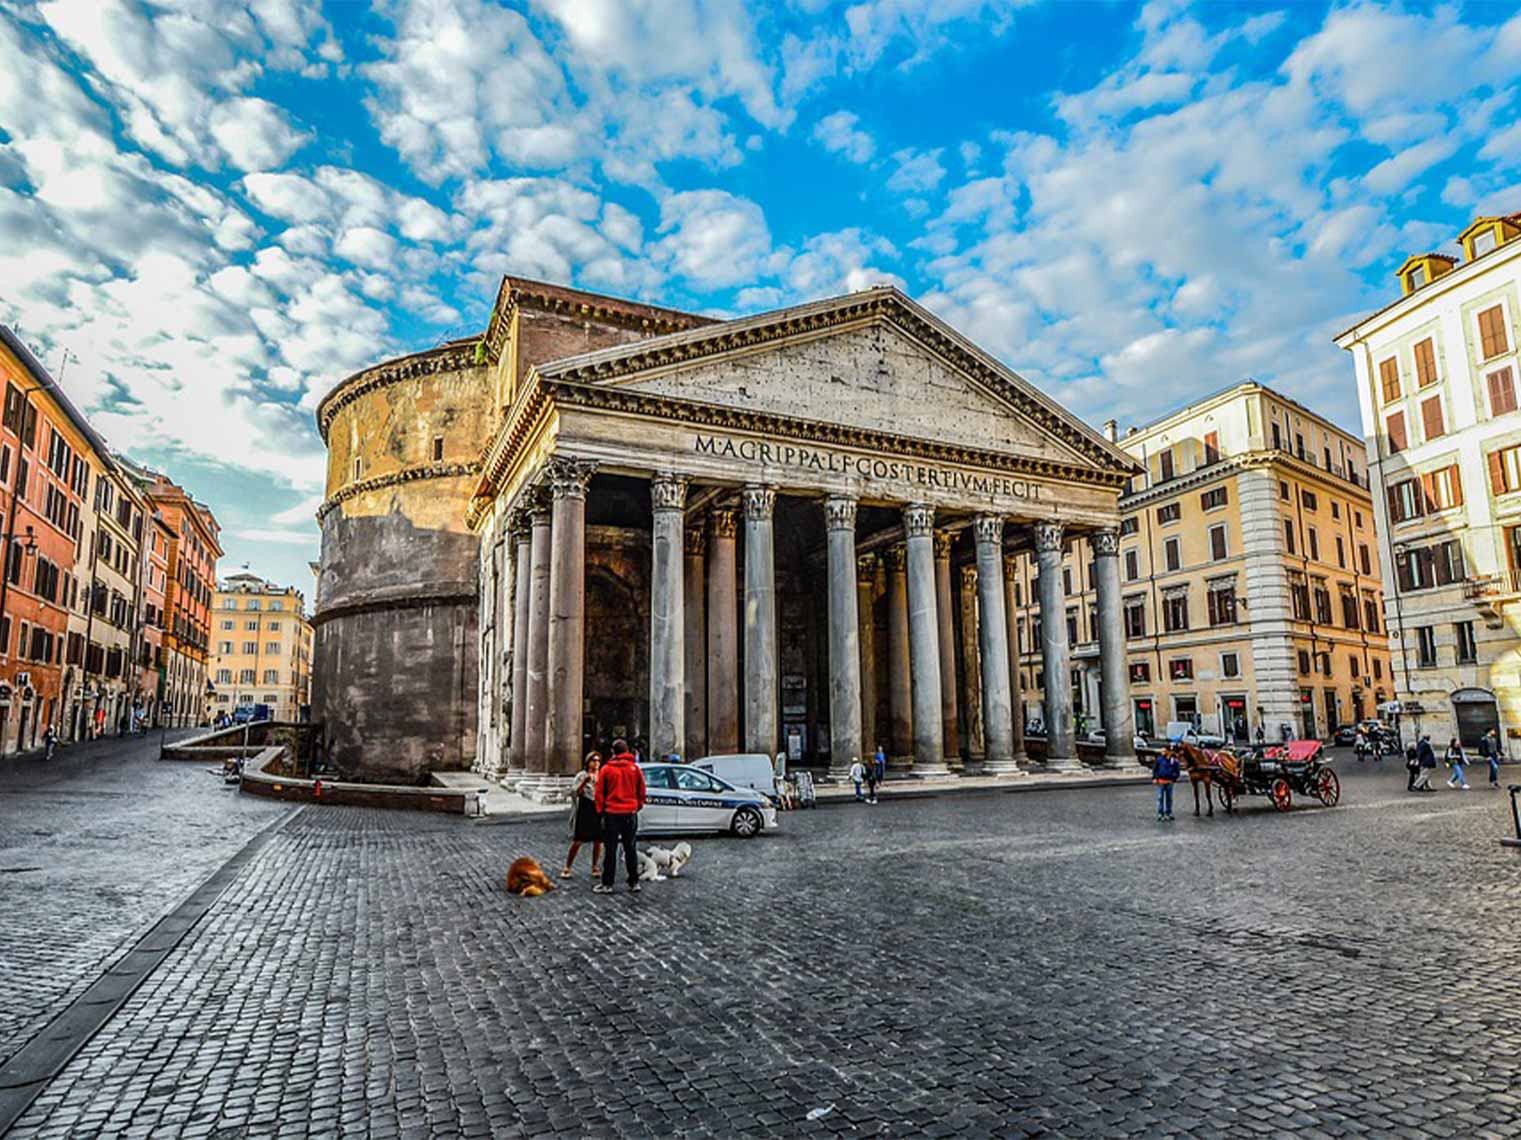 Which famous square in Rome is known for its impressive fountains and baroque palaces?